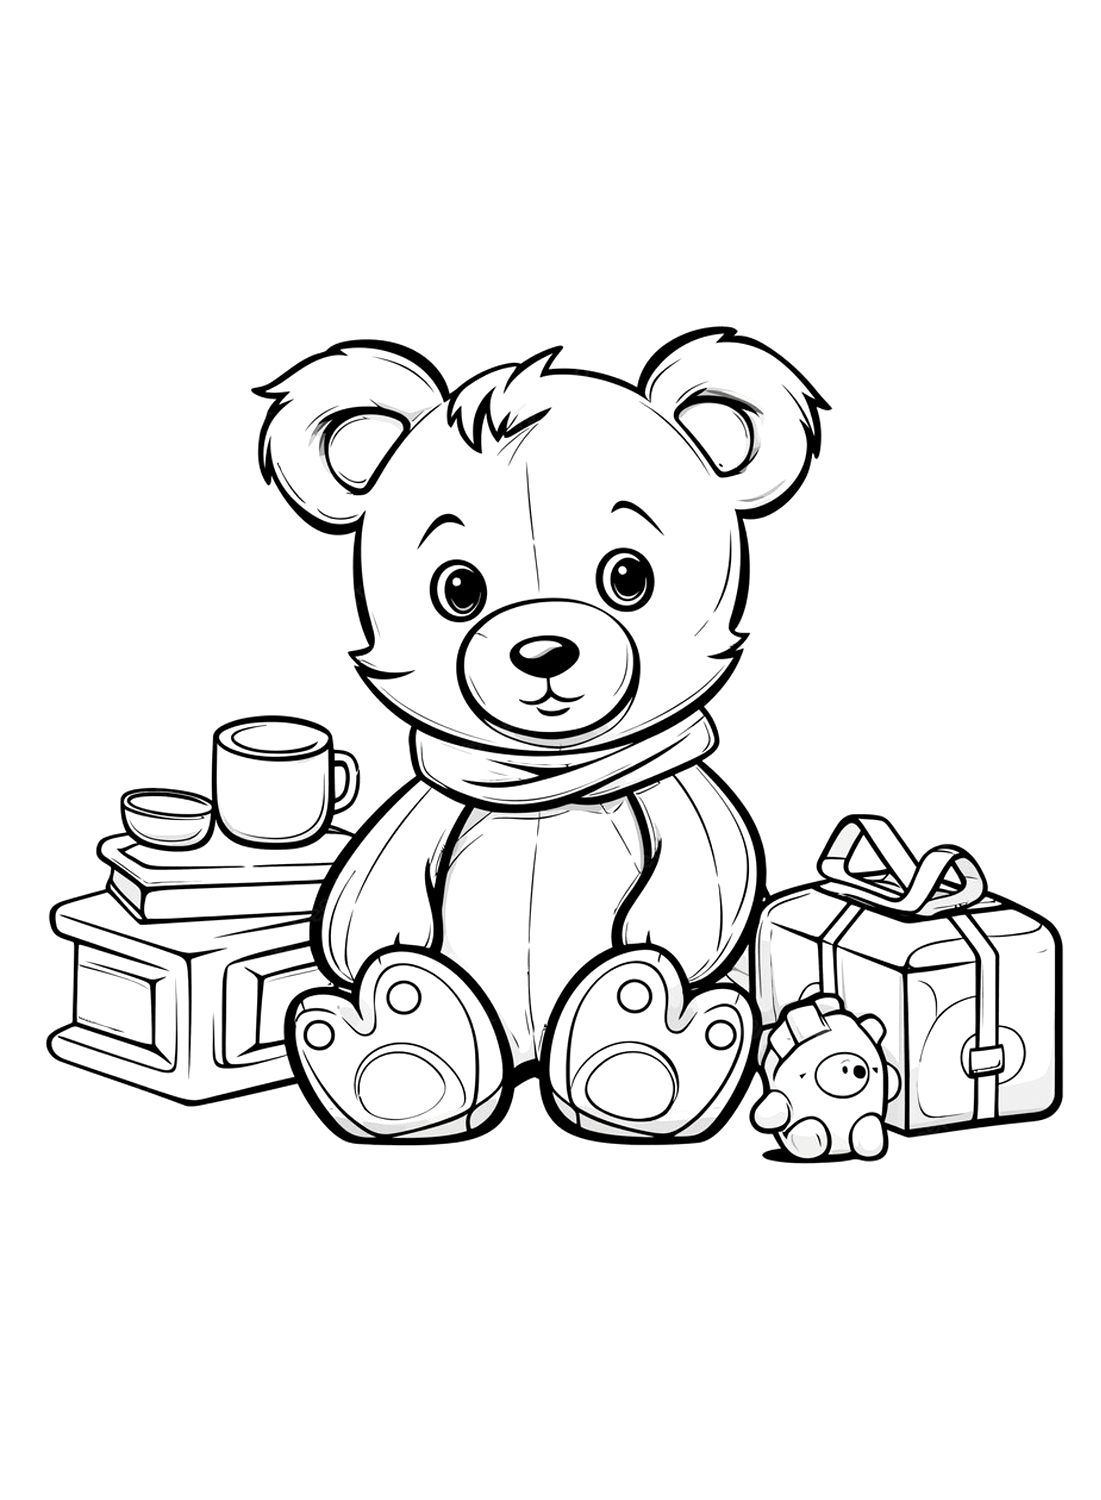 Free teddy bear coloring pages